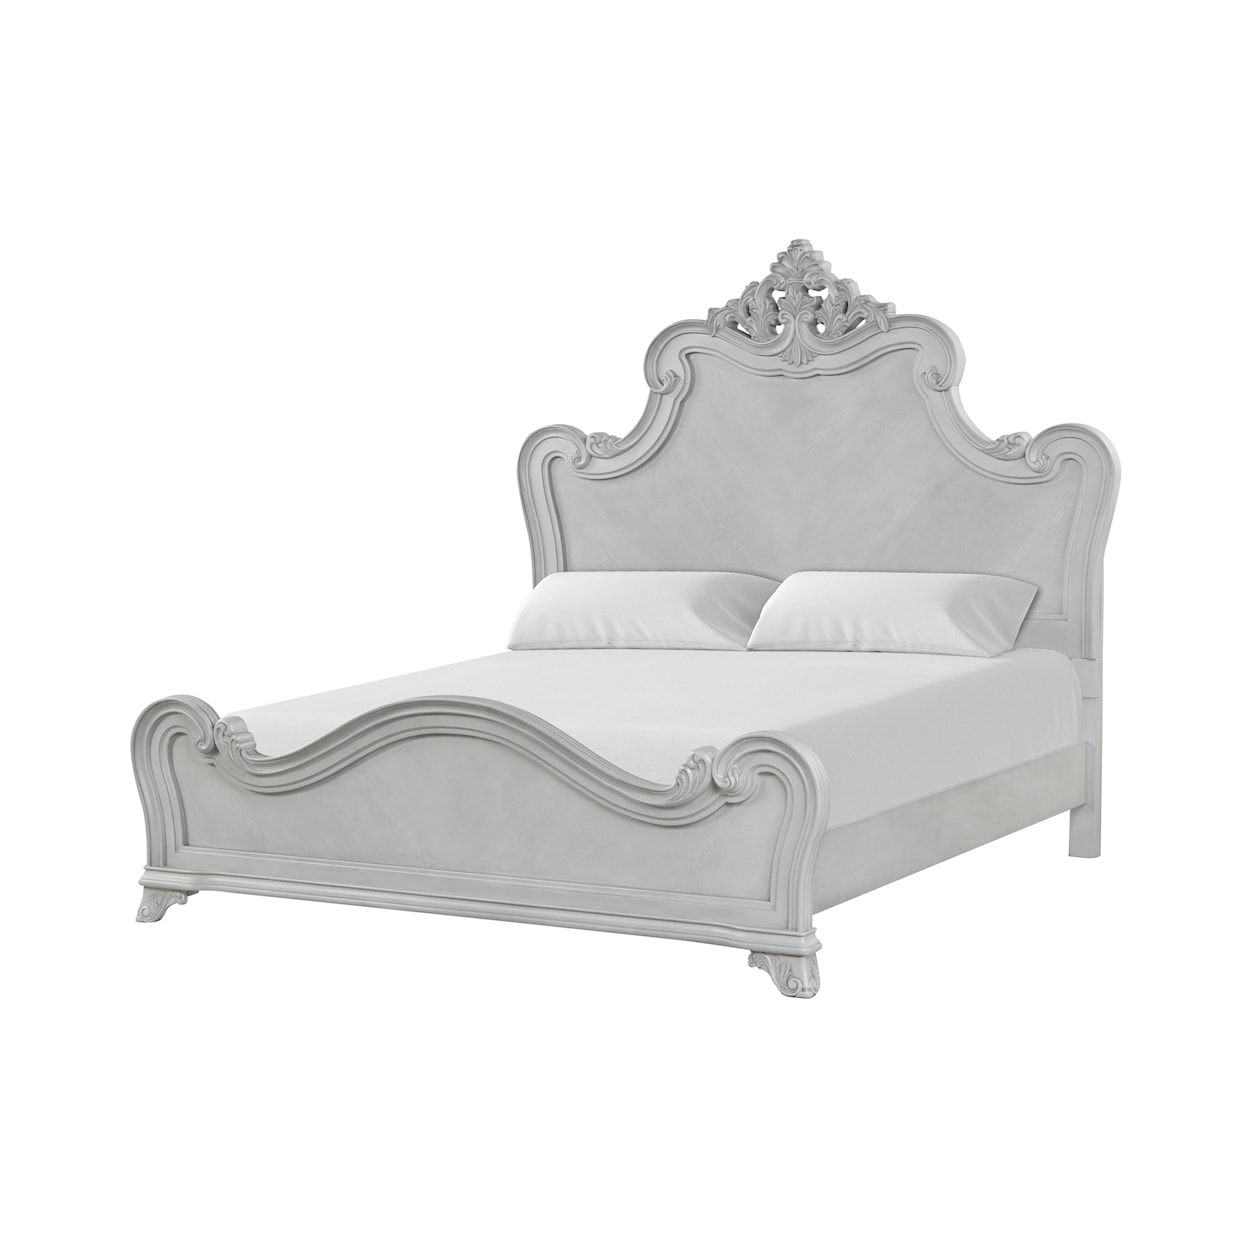 New Classic Furniture Cambria Hills 5-Piece Queen Arched Bedroom Set